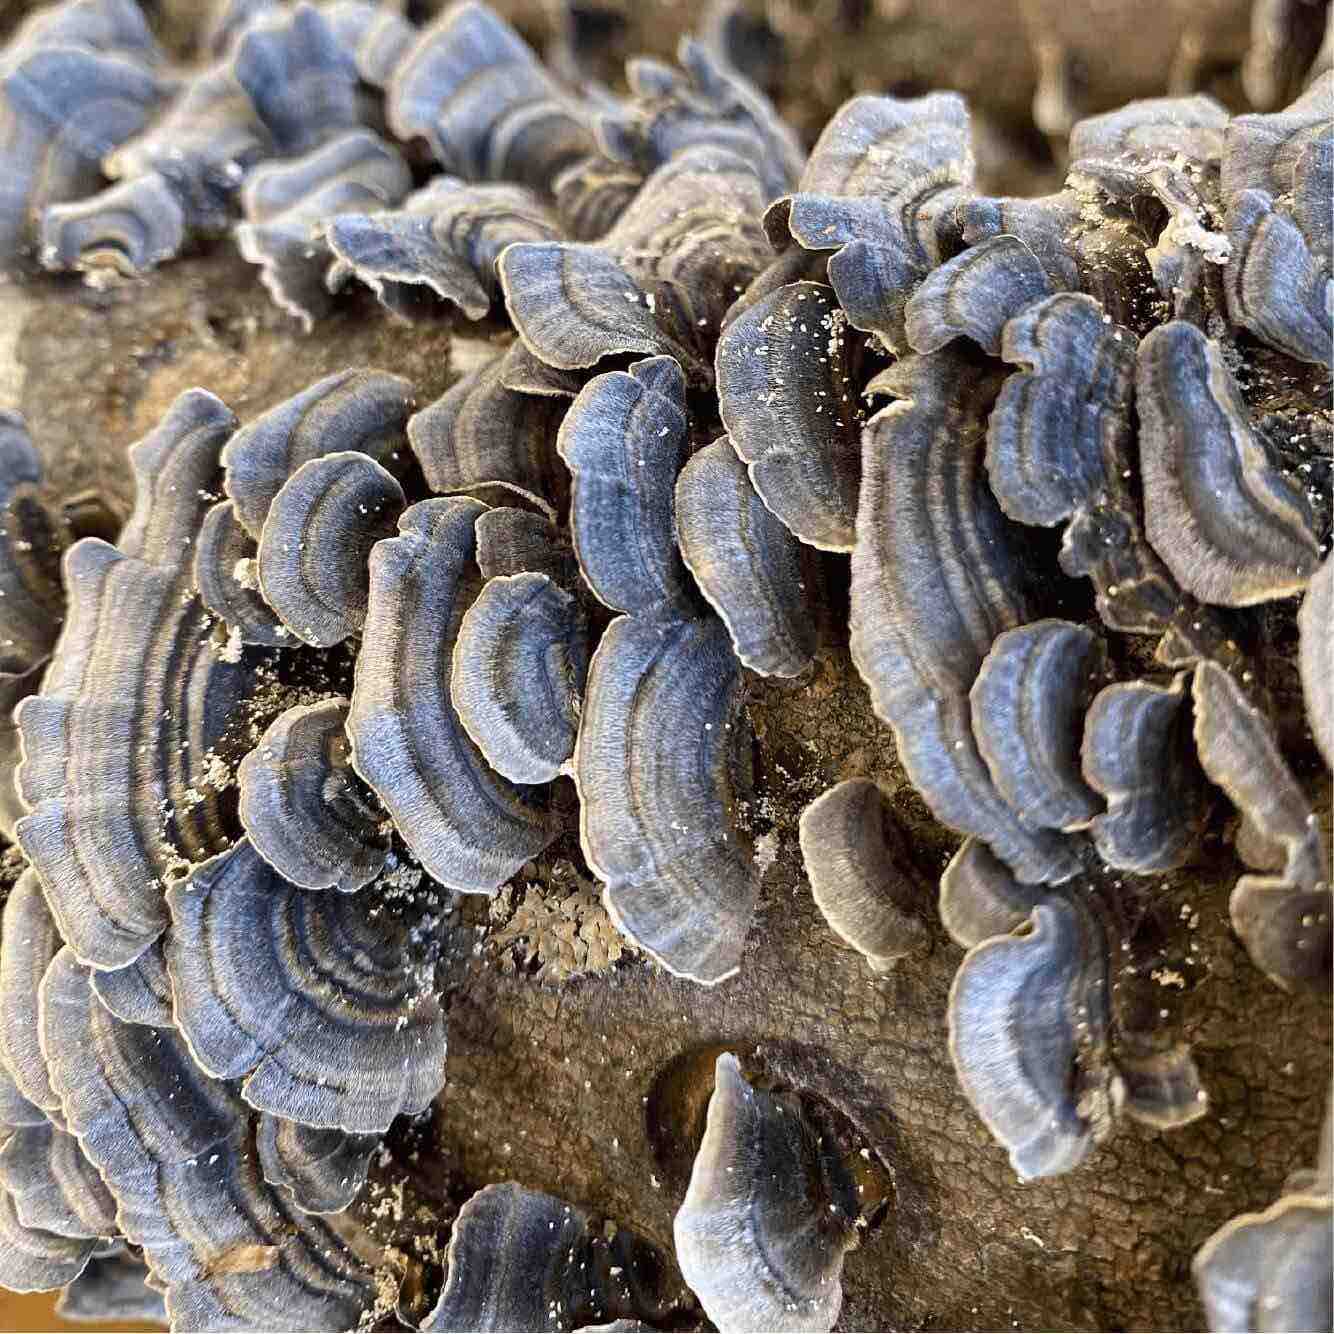 Turkey Tail Mushroom Identification: How to tell if your Trametes versicolor is Legit or a Look-a-like.